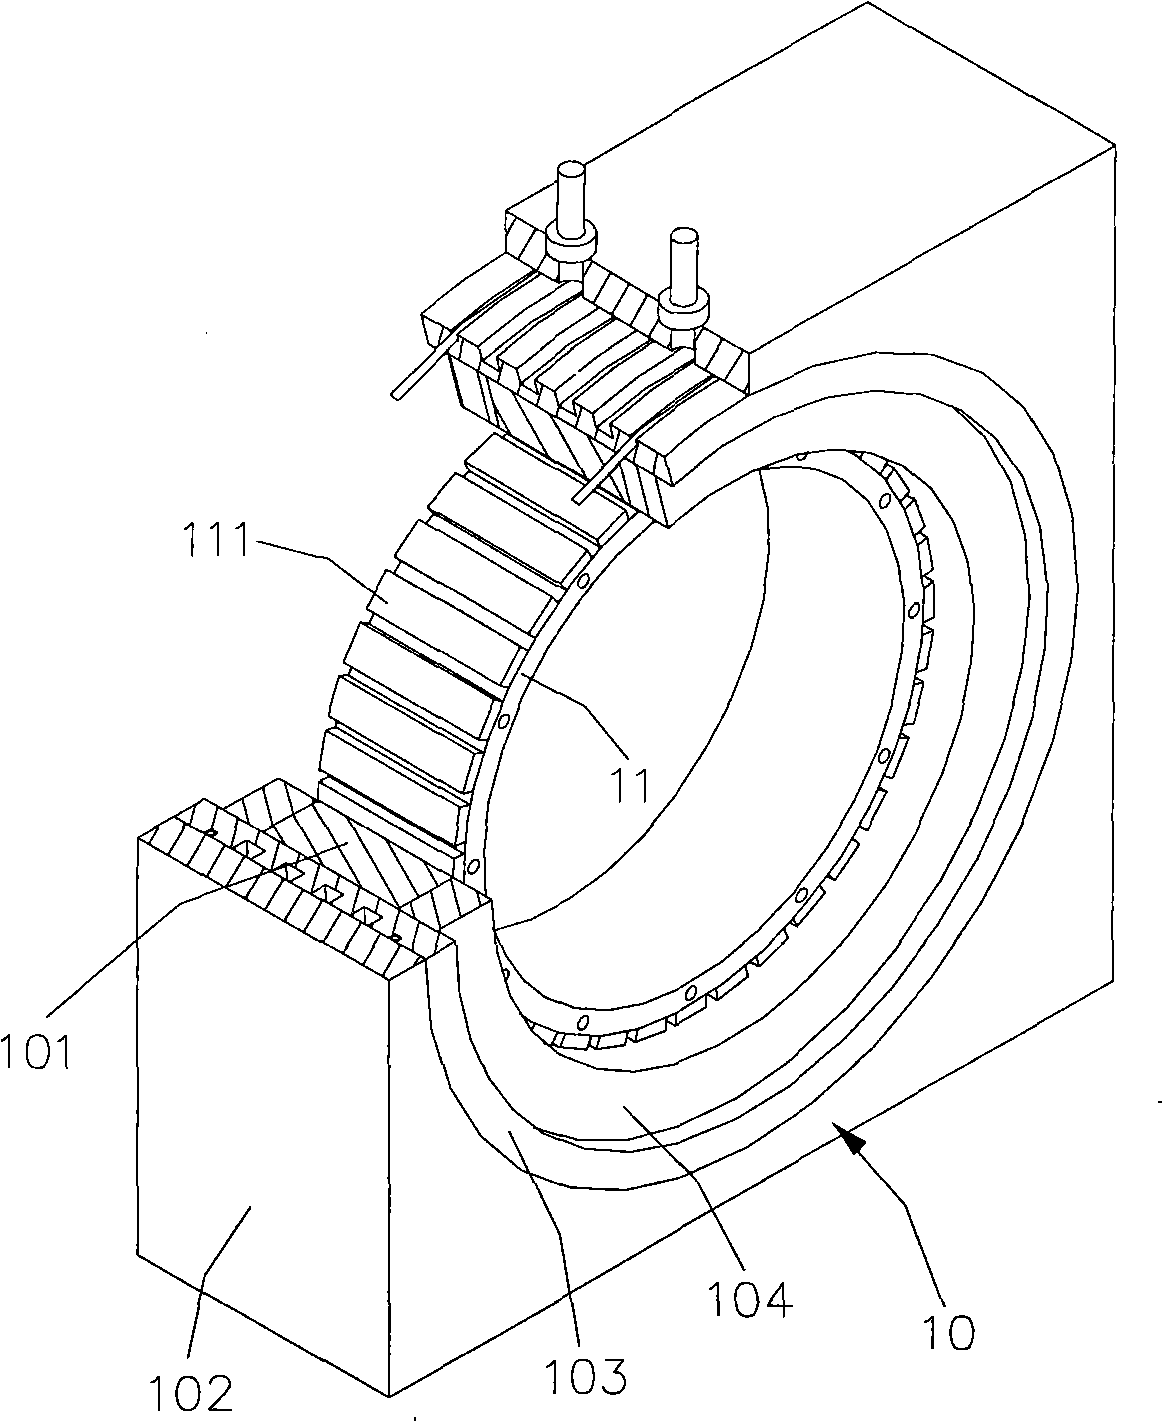 Main shaft remaining gap eliminating construction for direct driving rotary distance motor apparatus